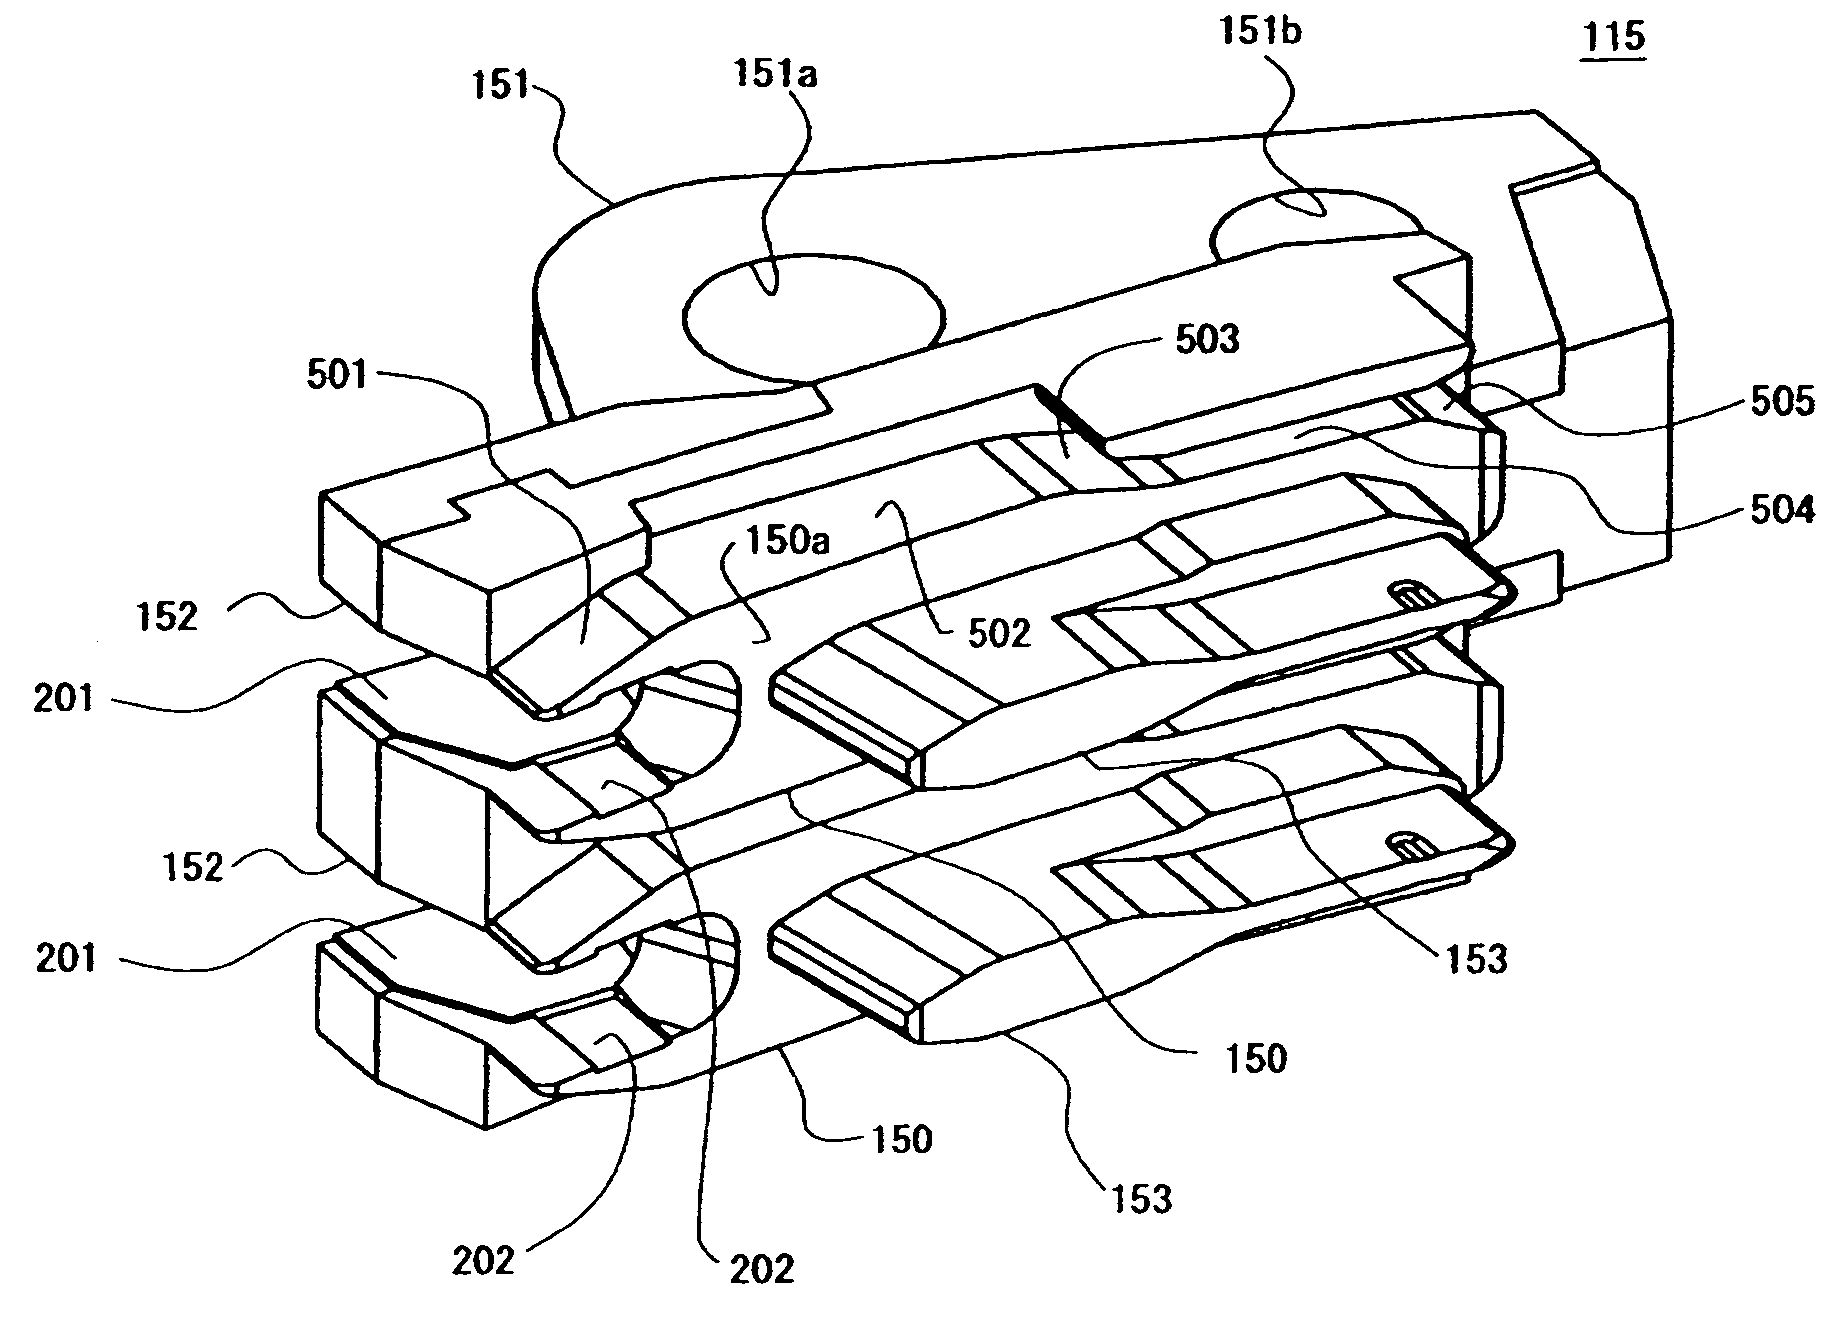 Disk drive device and ramp used therefor